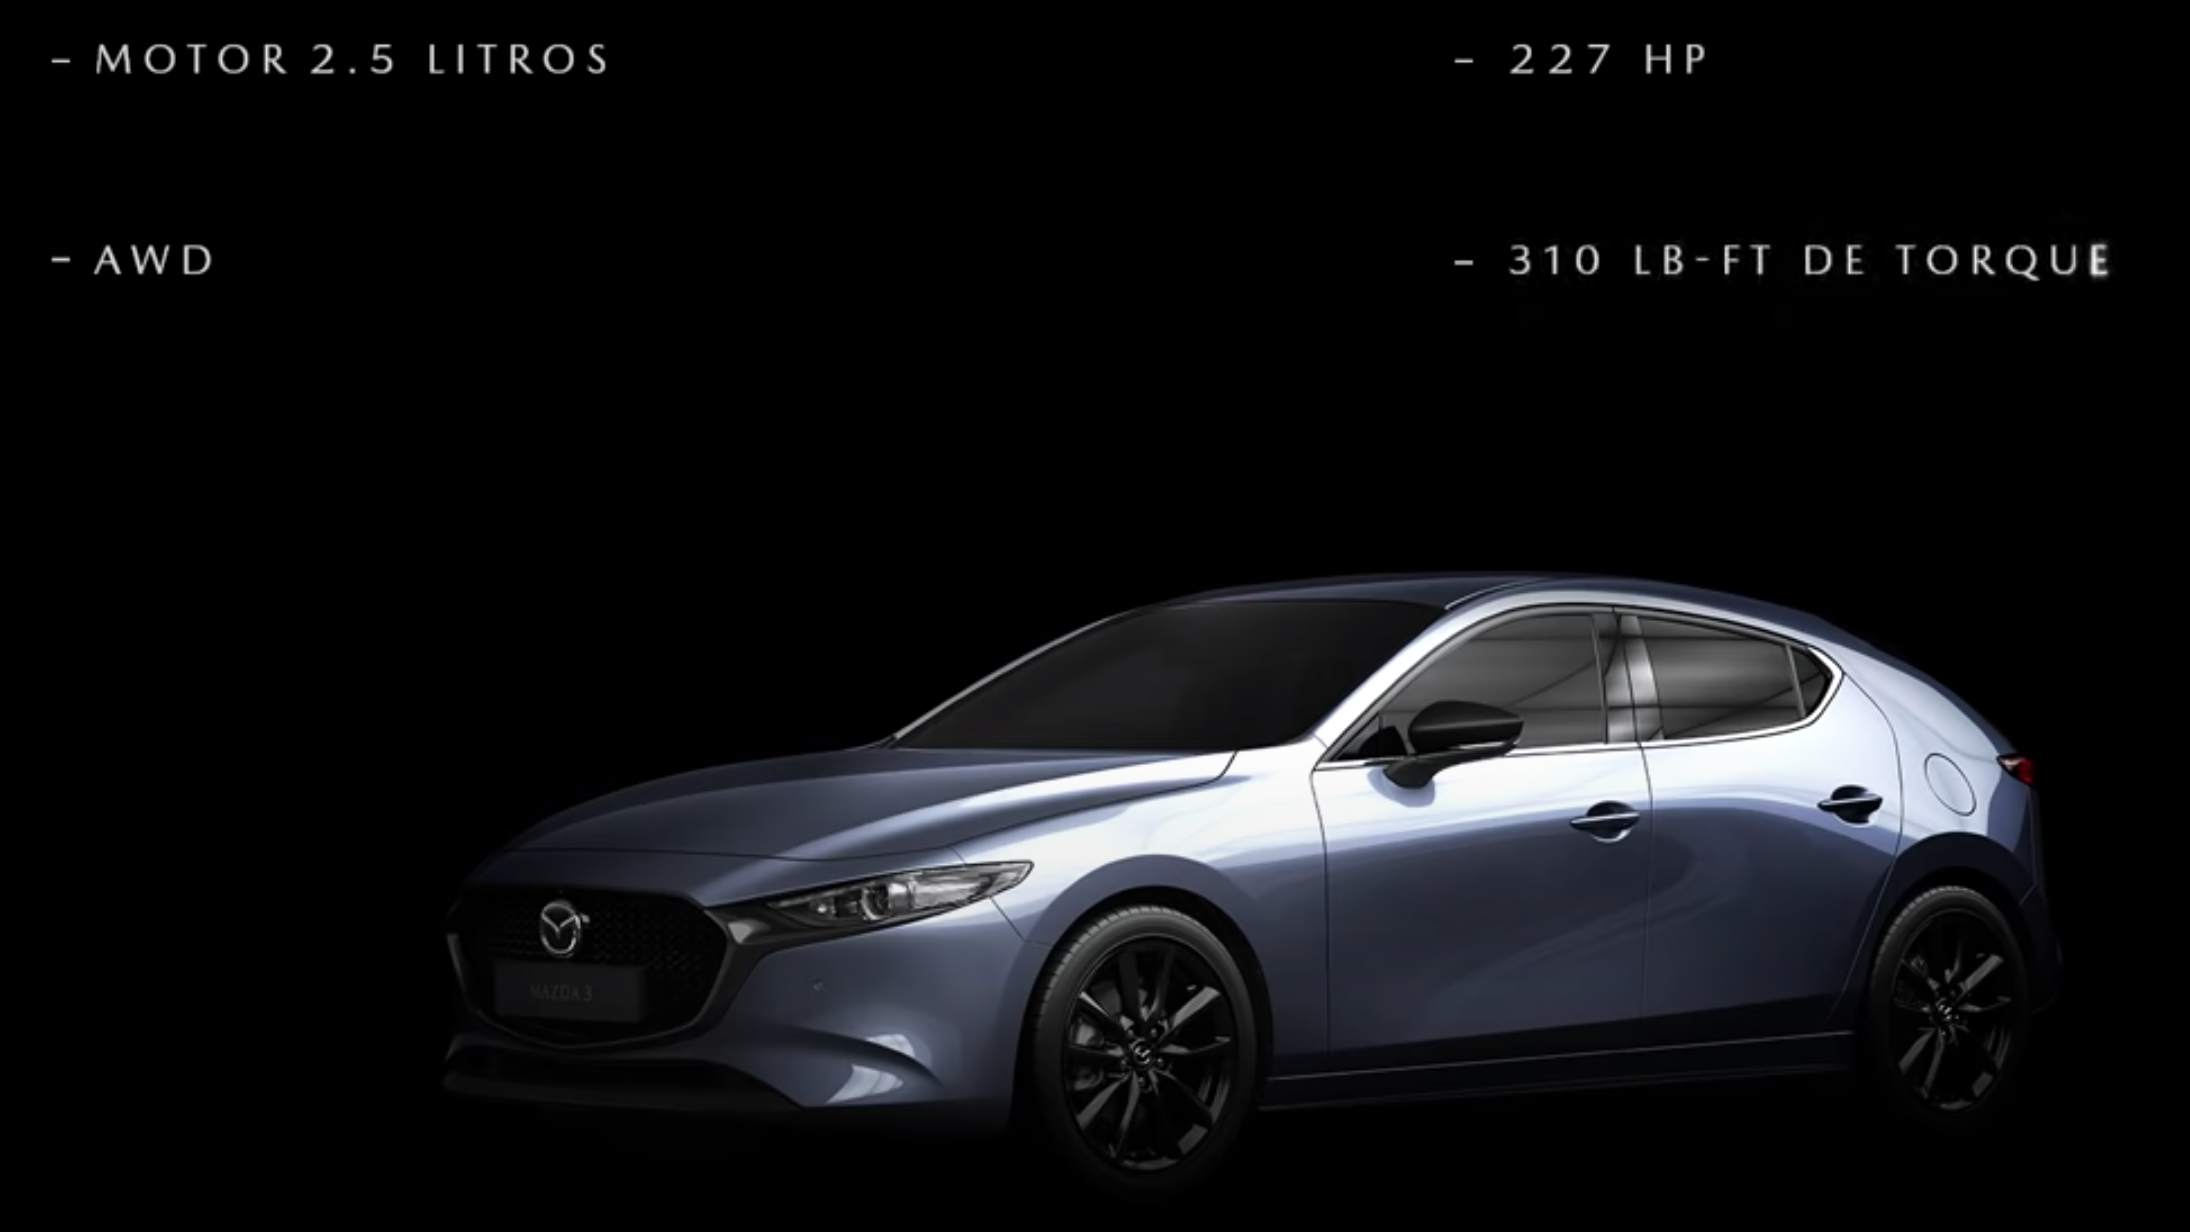 The 2021 Mazda 3 Turbo Will Get At Least 227 Horsepower And 310 LB-FT Of Torque